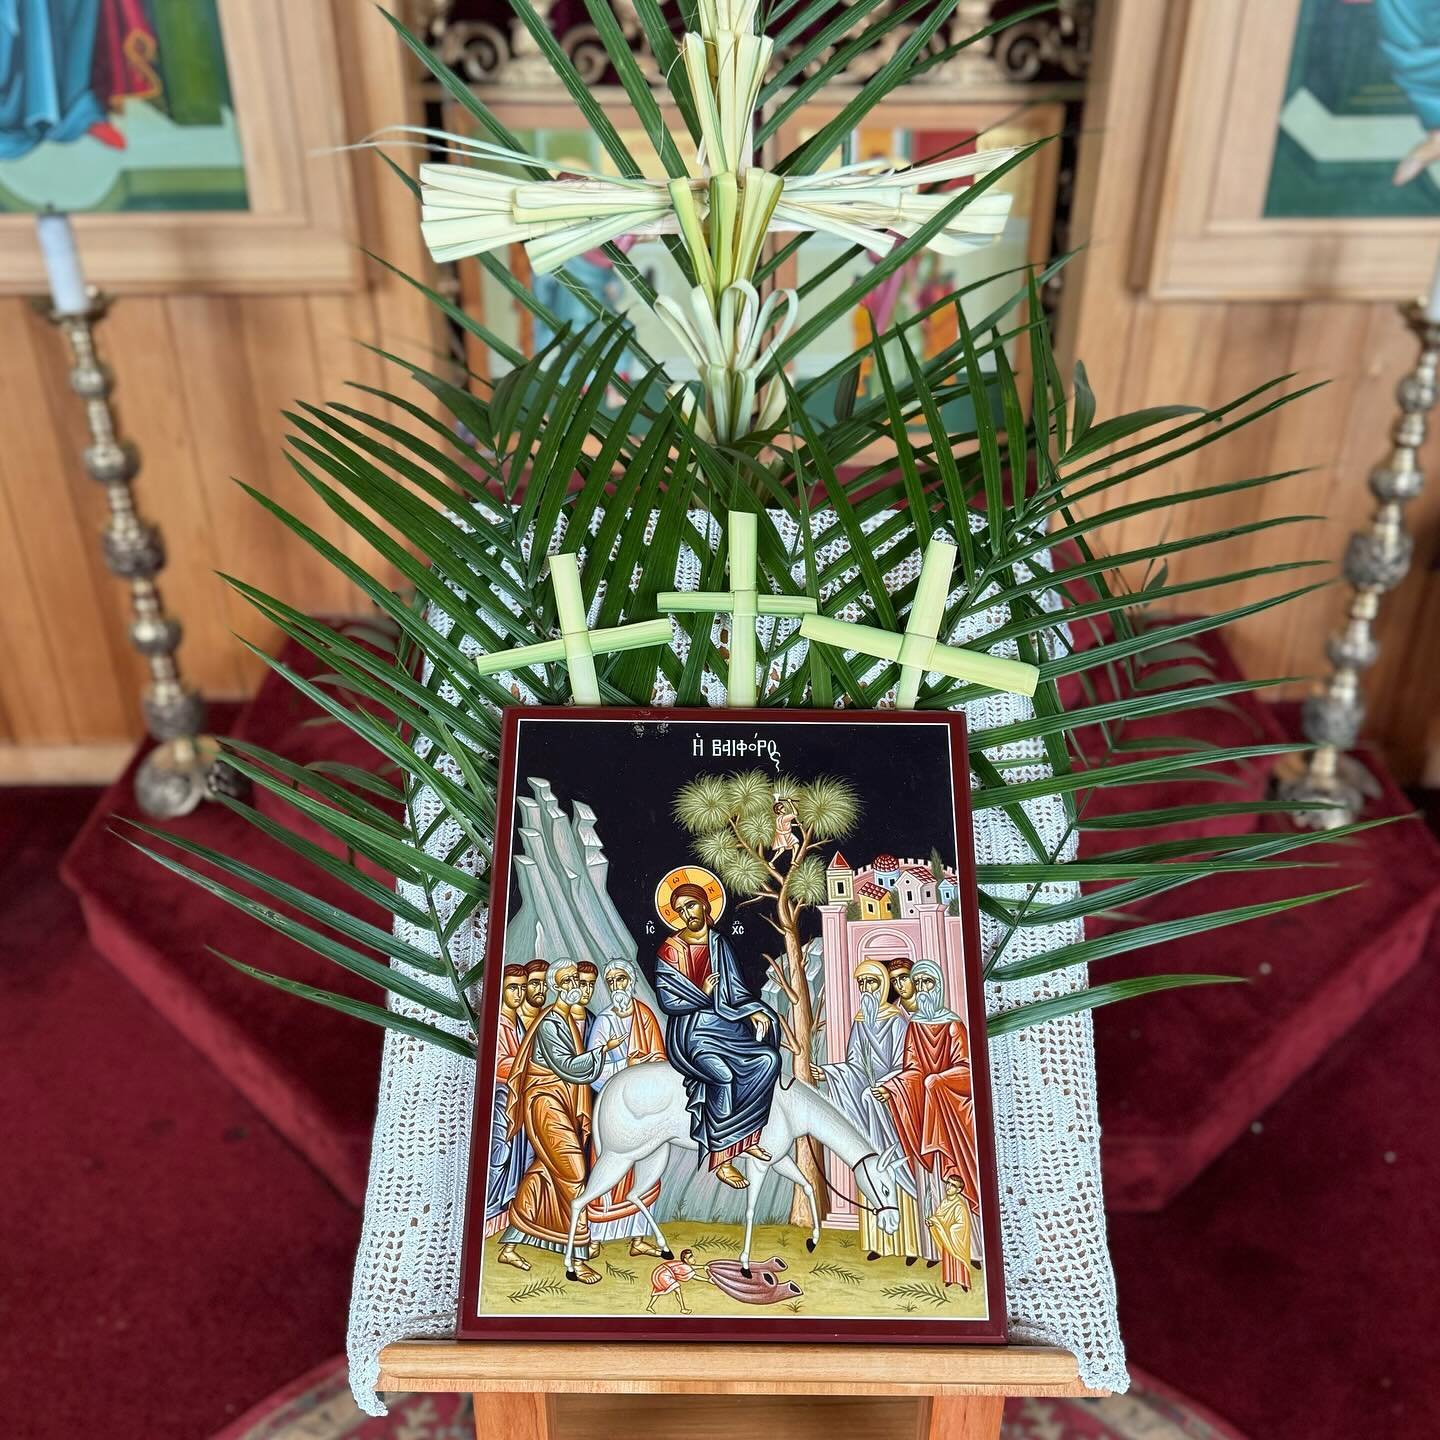 Preparations for Palm Sunday following Divine Liturgy this morning.